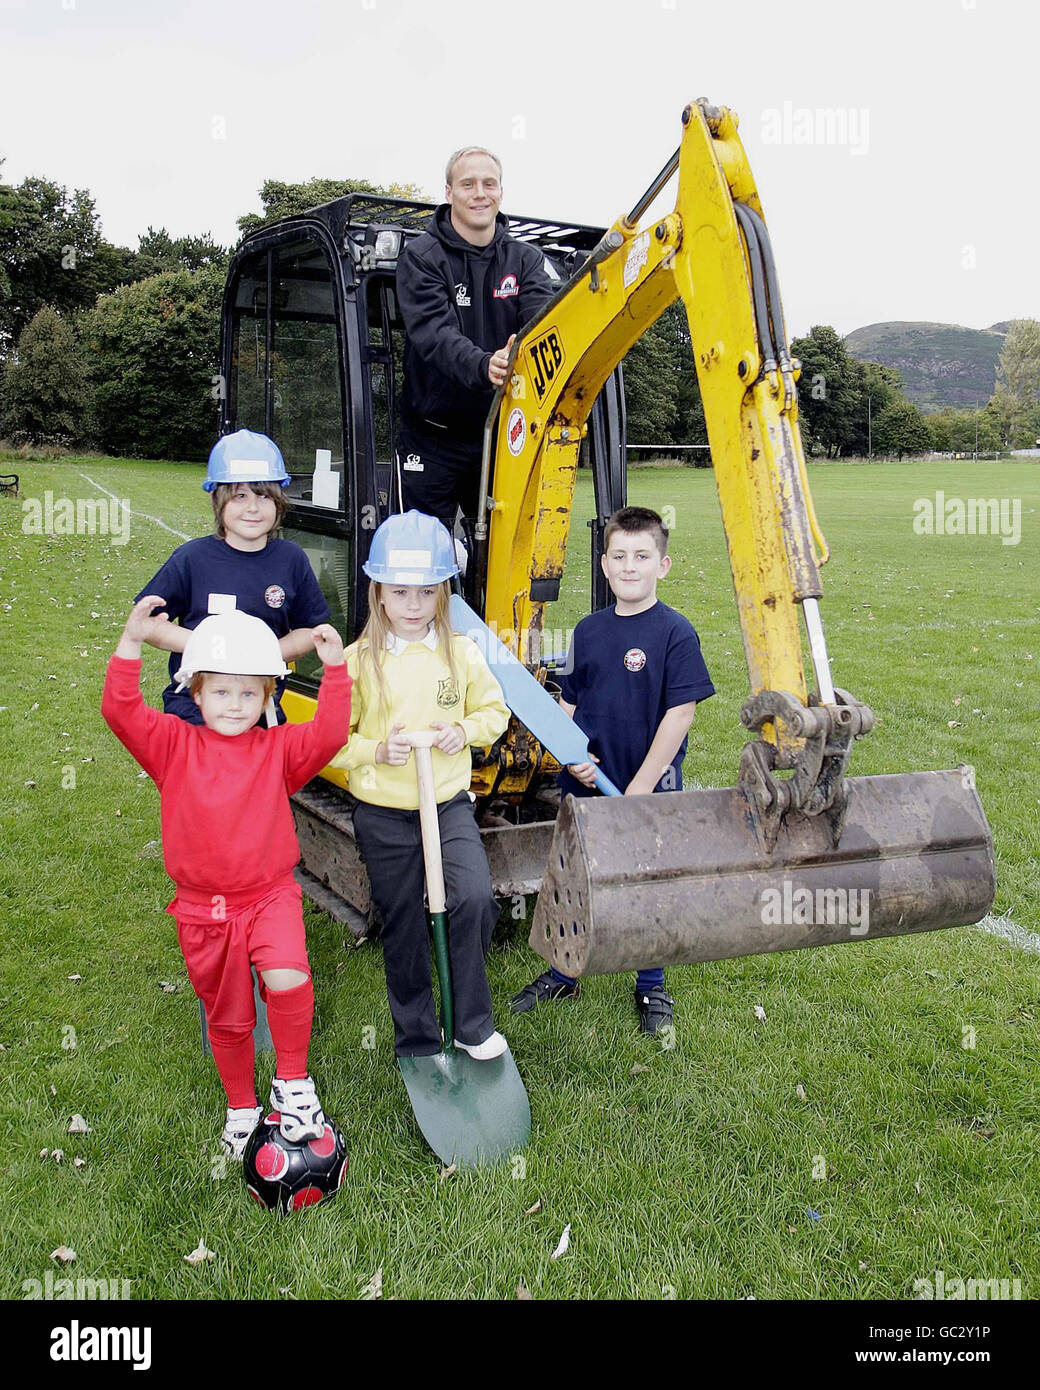 Edinburgh winger Andrew Turnbull (back) with children from Lismore RFC and Edinburgh South FC and Edinburgh Cricket Club during the launch of construction of a multi-sport facility for Inch Park Community Sports Club Centre at Inch Park, Edinburgh. Stock Photo